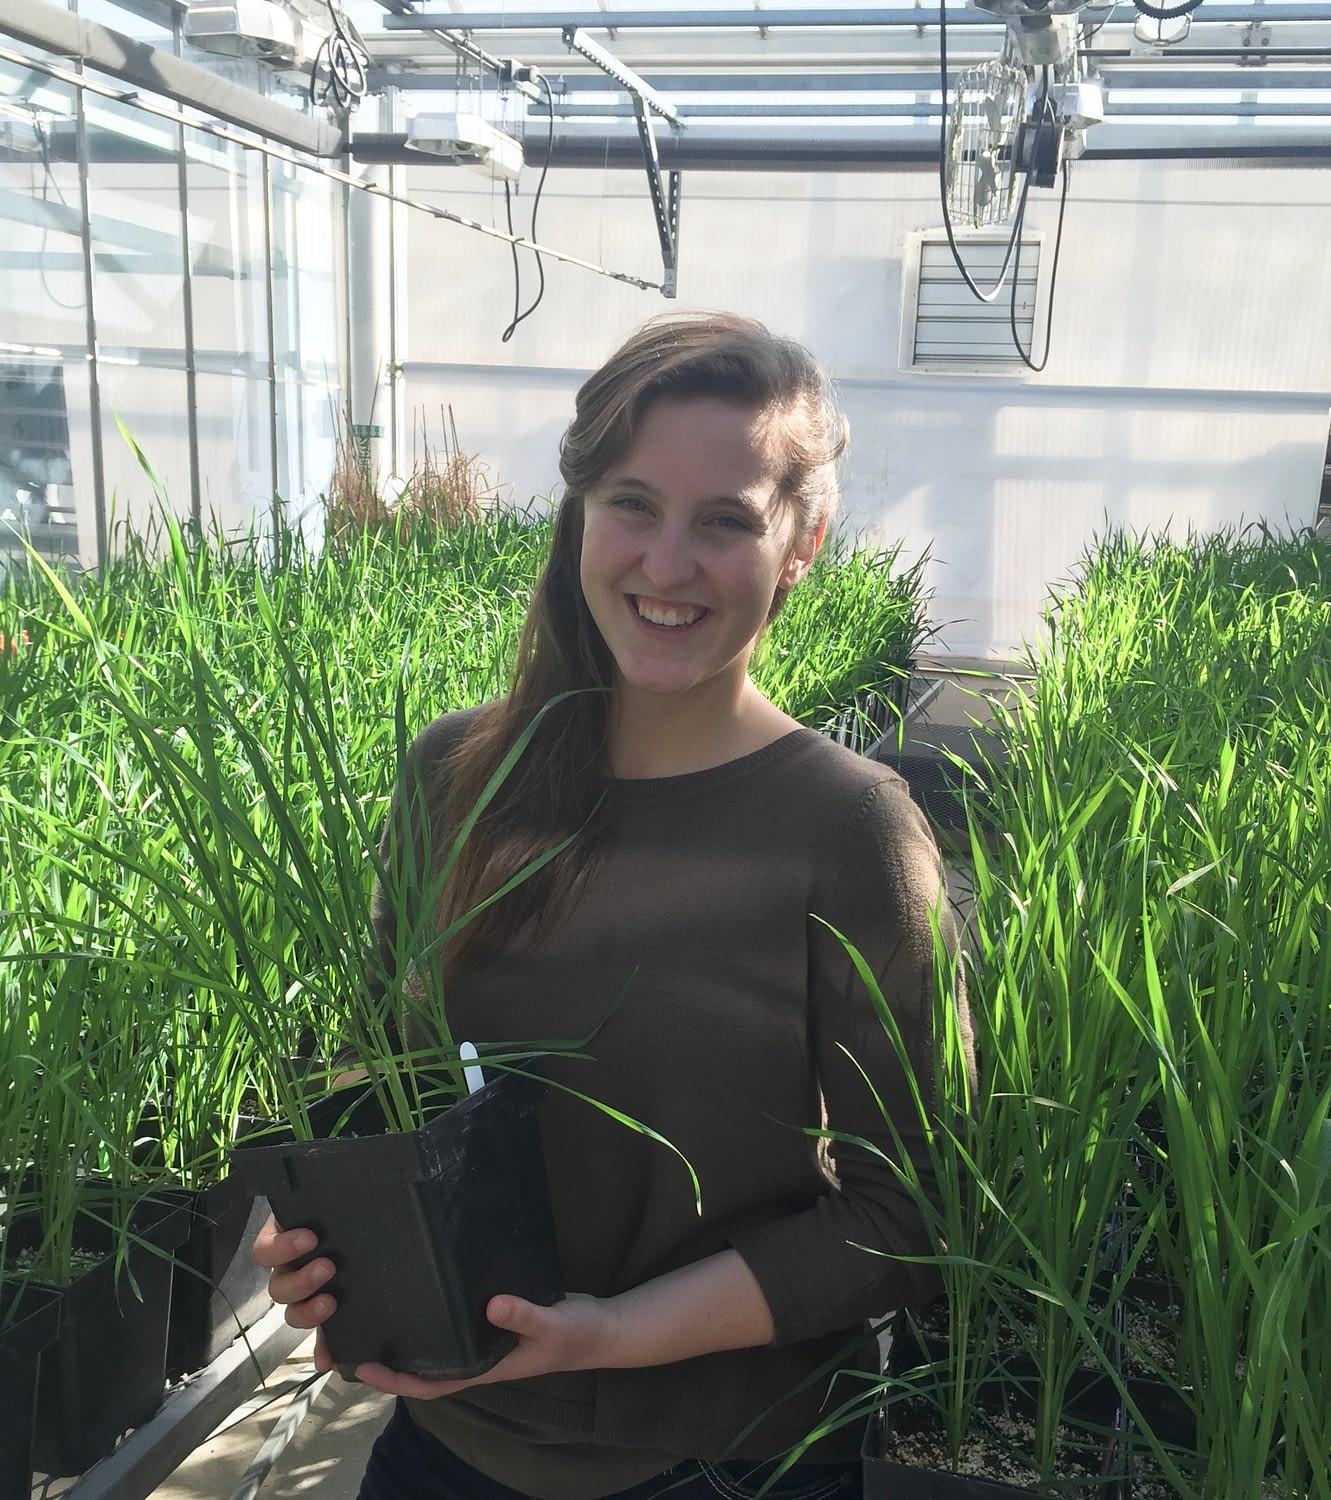 Tessa Mahmoudi, plant microbiologist and 2012 World Food Prize Borlaug-Ruan summer intern, credits the mentorship of CIMMYT researchers in Turkey with changing her outlook on the potential of science to improve food security and health. (Photo: University of Minnesota)